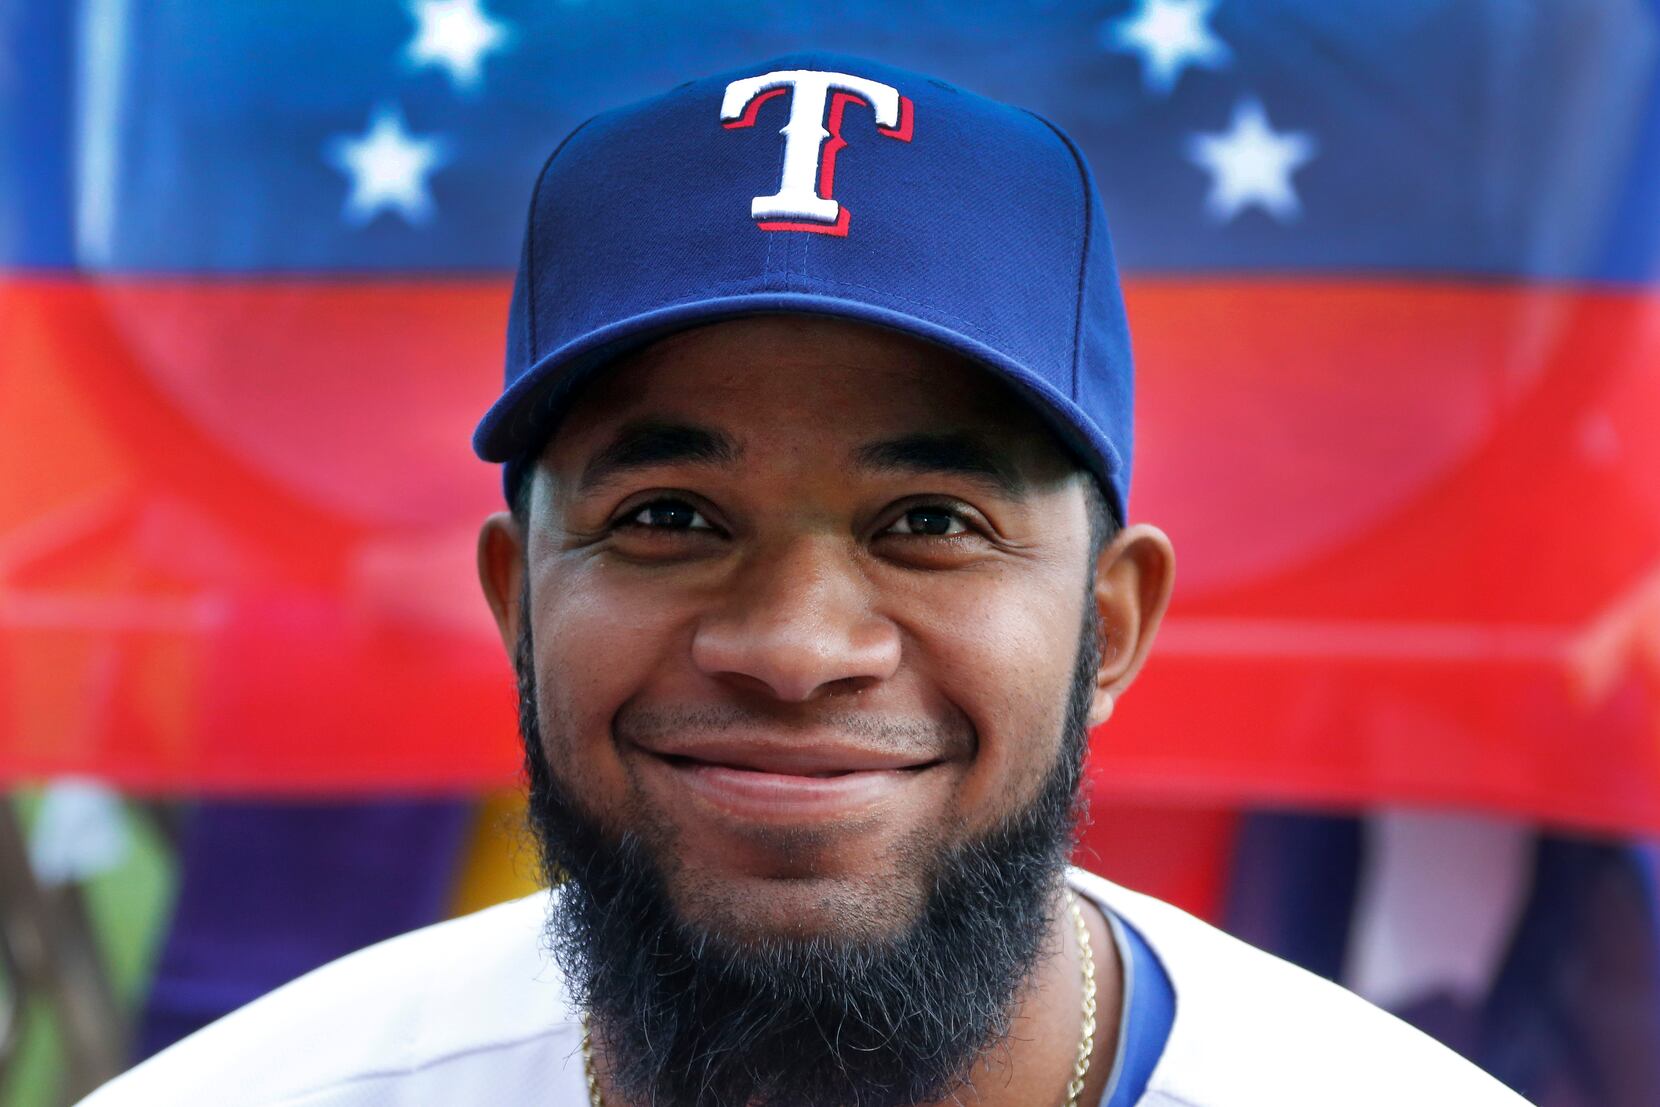 What kind of future exists for shortstop Elvis Andrus with the Texas Rangers ?